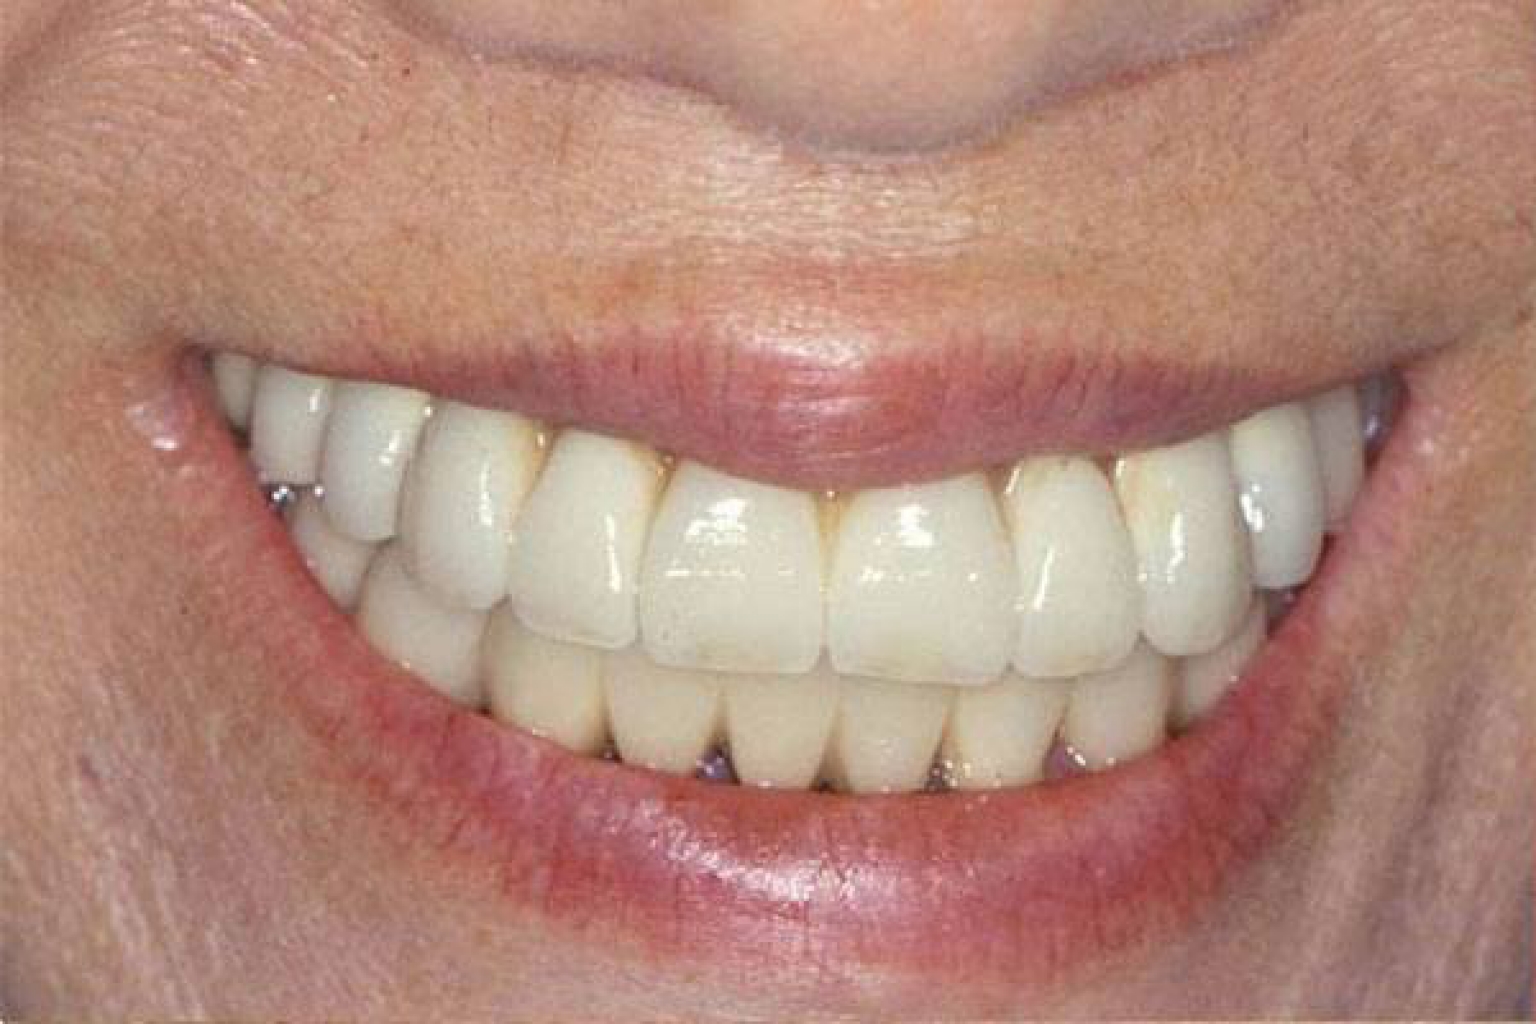 This patient received a full-mouth rehabilitation of both upper and lower arches with implant-supported bridges.